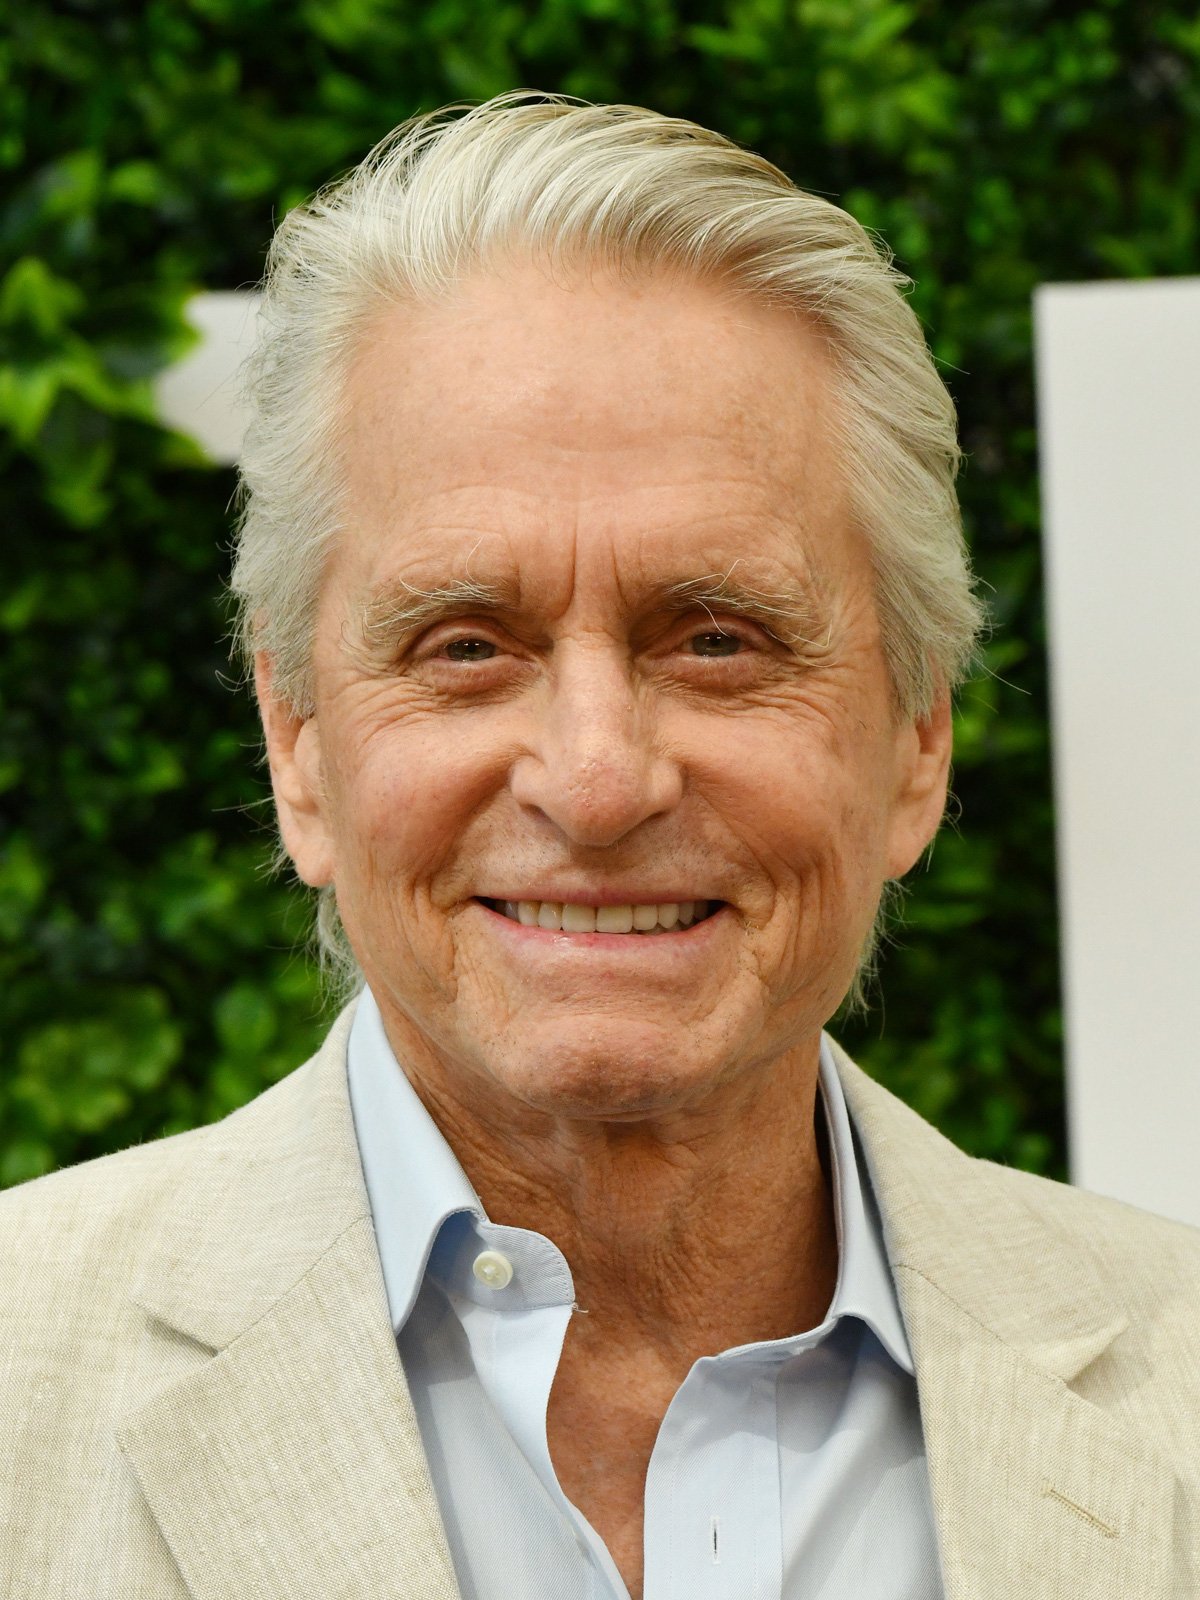 Michael Douglas Thinks the Brits Are Stealing Hollywoods 